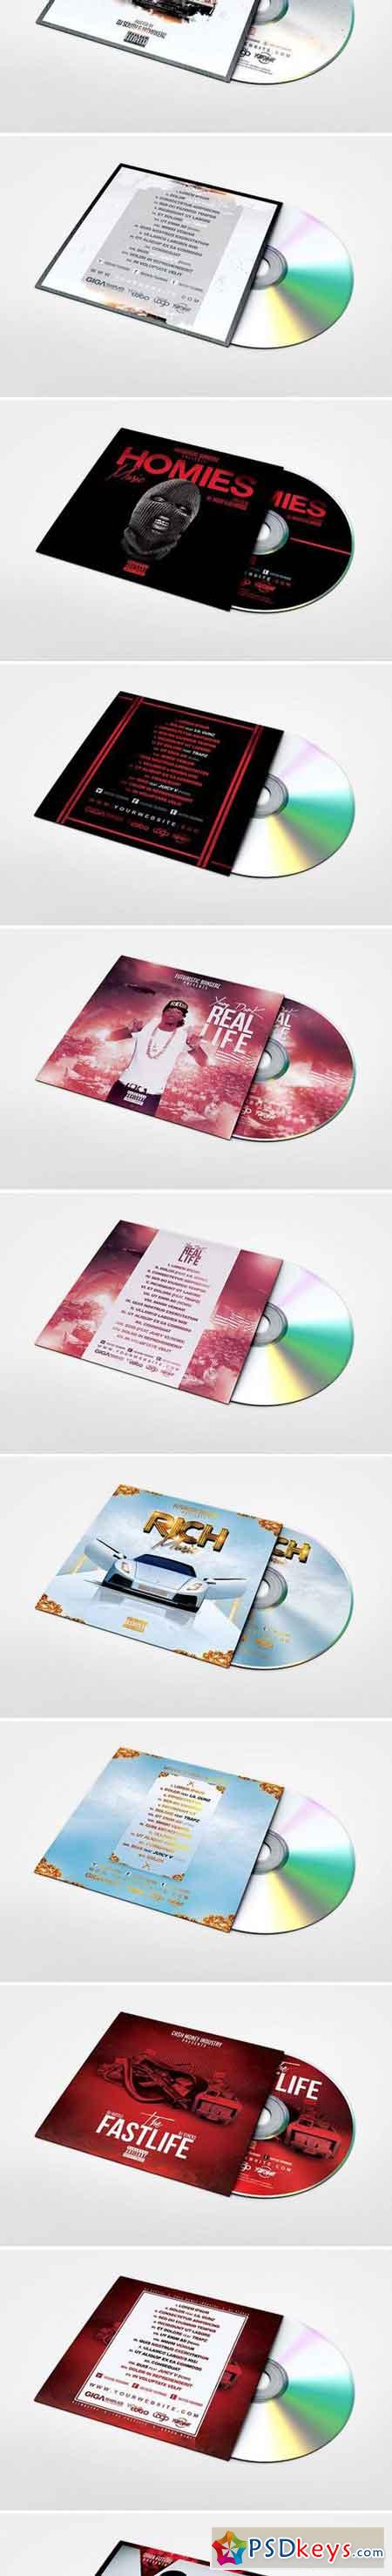 35 CD COVER TEMPLATES 1607233